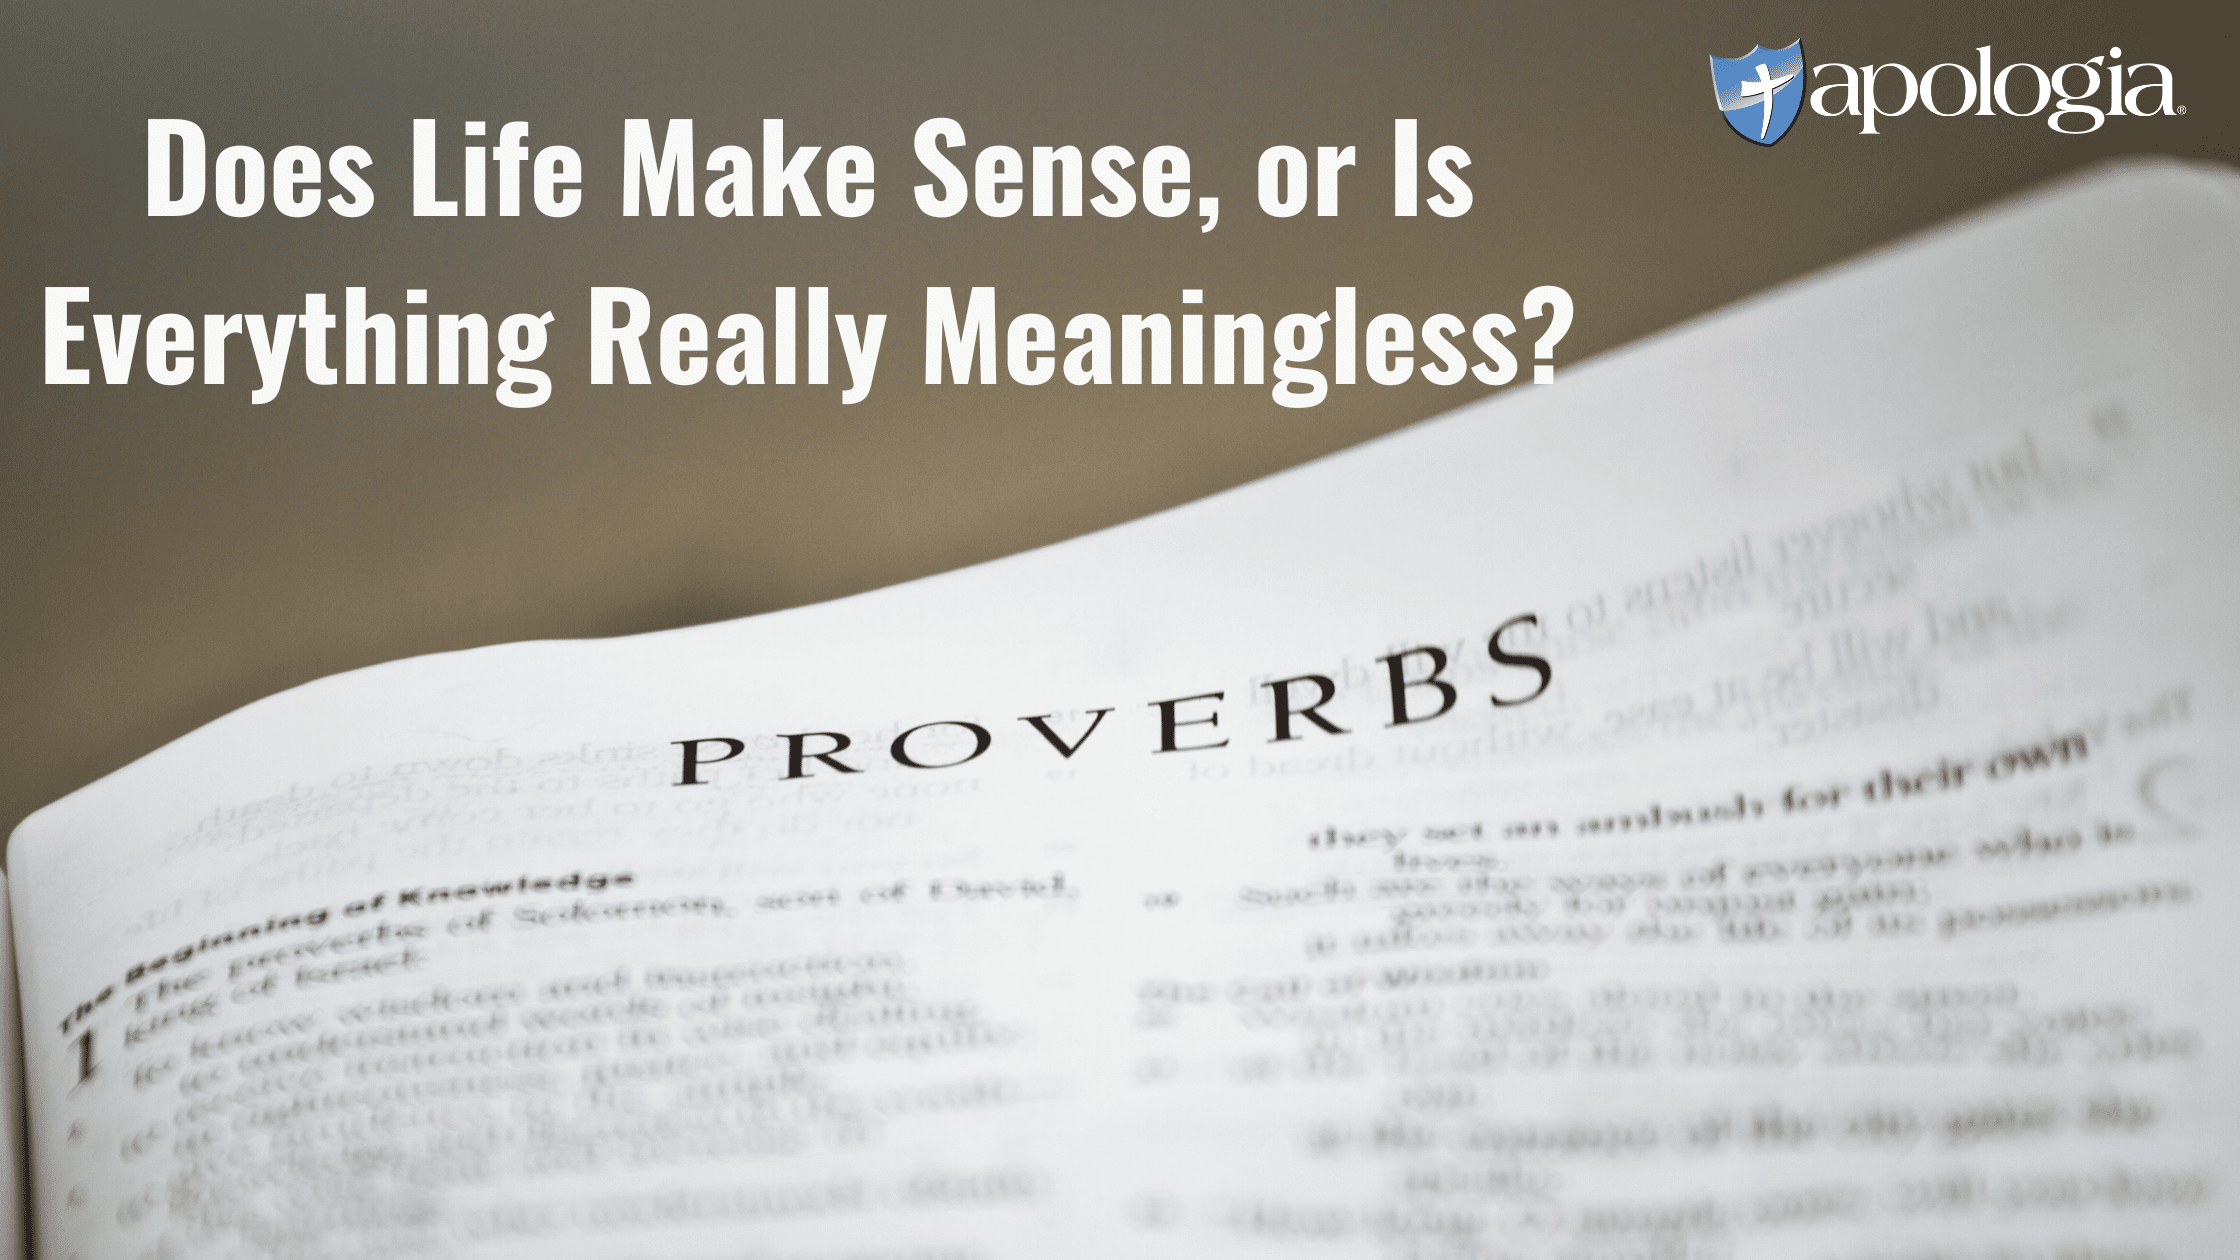 Does Life Make Sense, or Is Everything Really Meaningless?